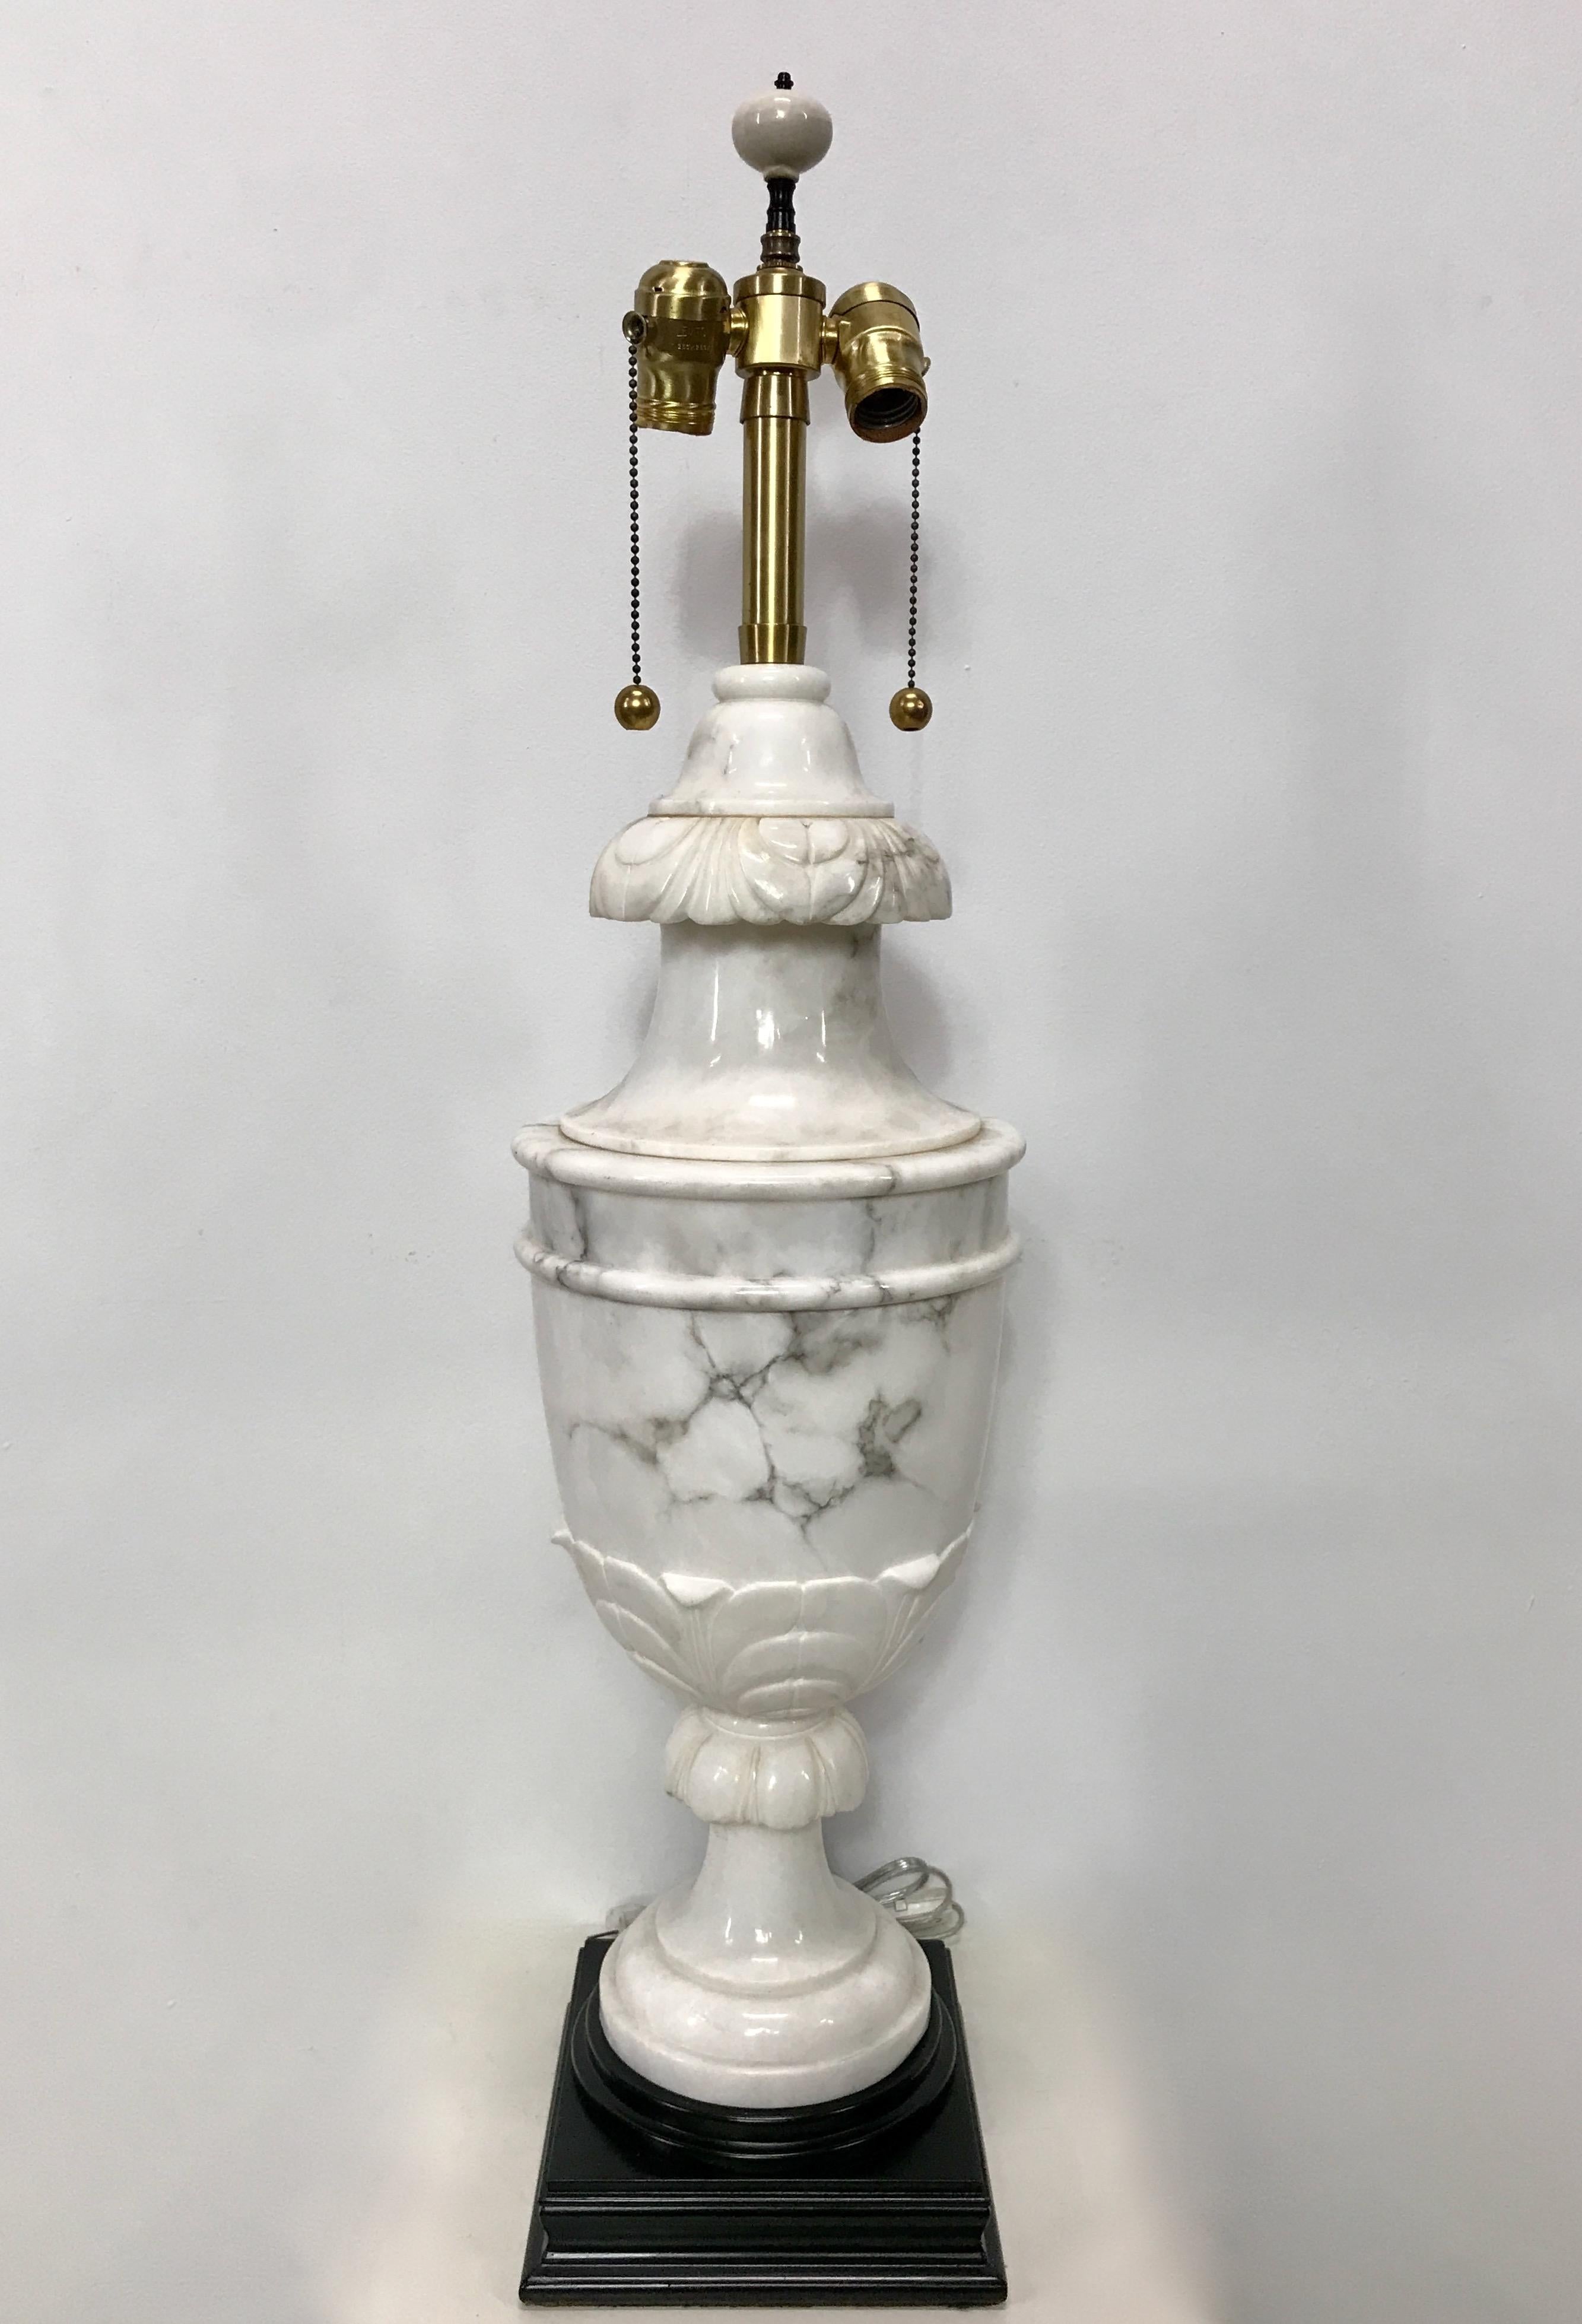 Impressive large scale Classical Style marble table lamp.
Newly re-wired and the wood base refreshed.
In excellent condition.
Italy. circa 1960.
Height of urn not including the base and hardware is 24 inches high.